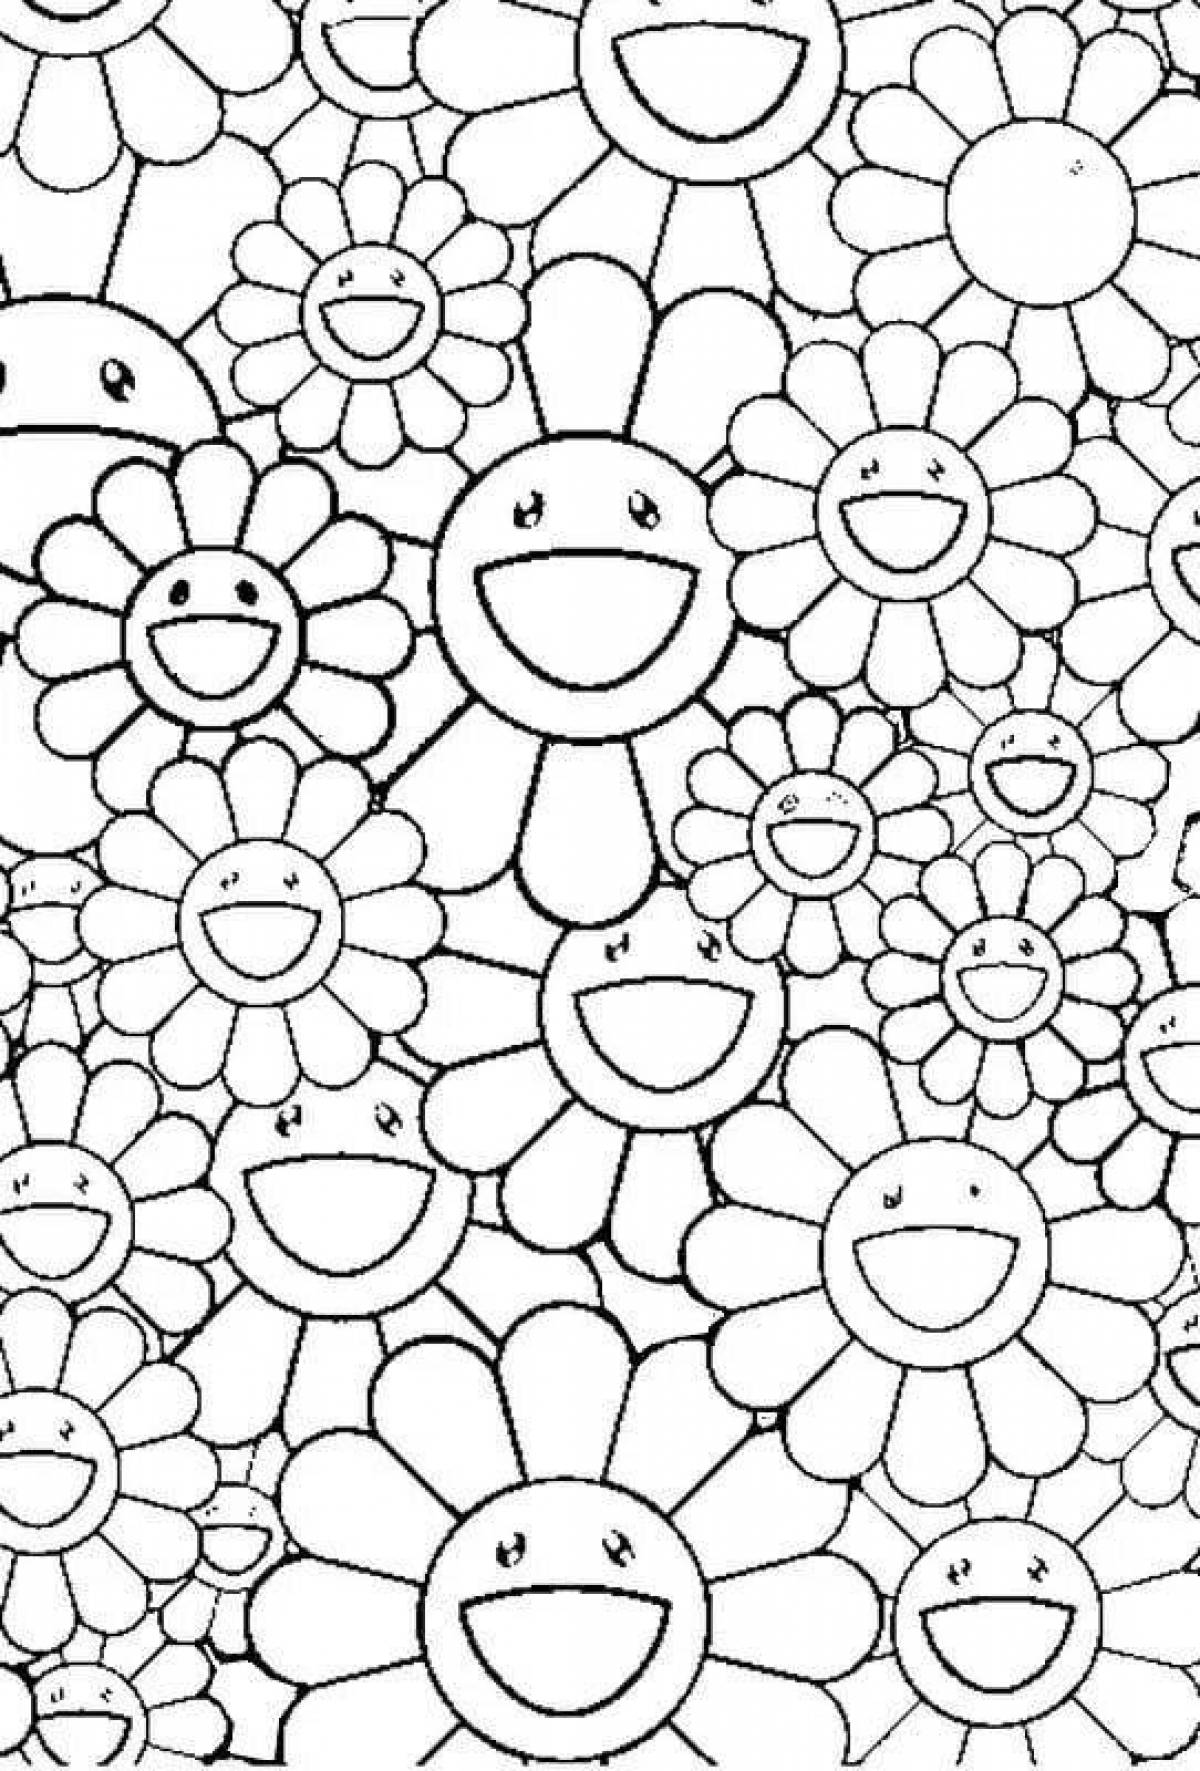 Color-frenzy coloring page indie kids style